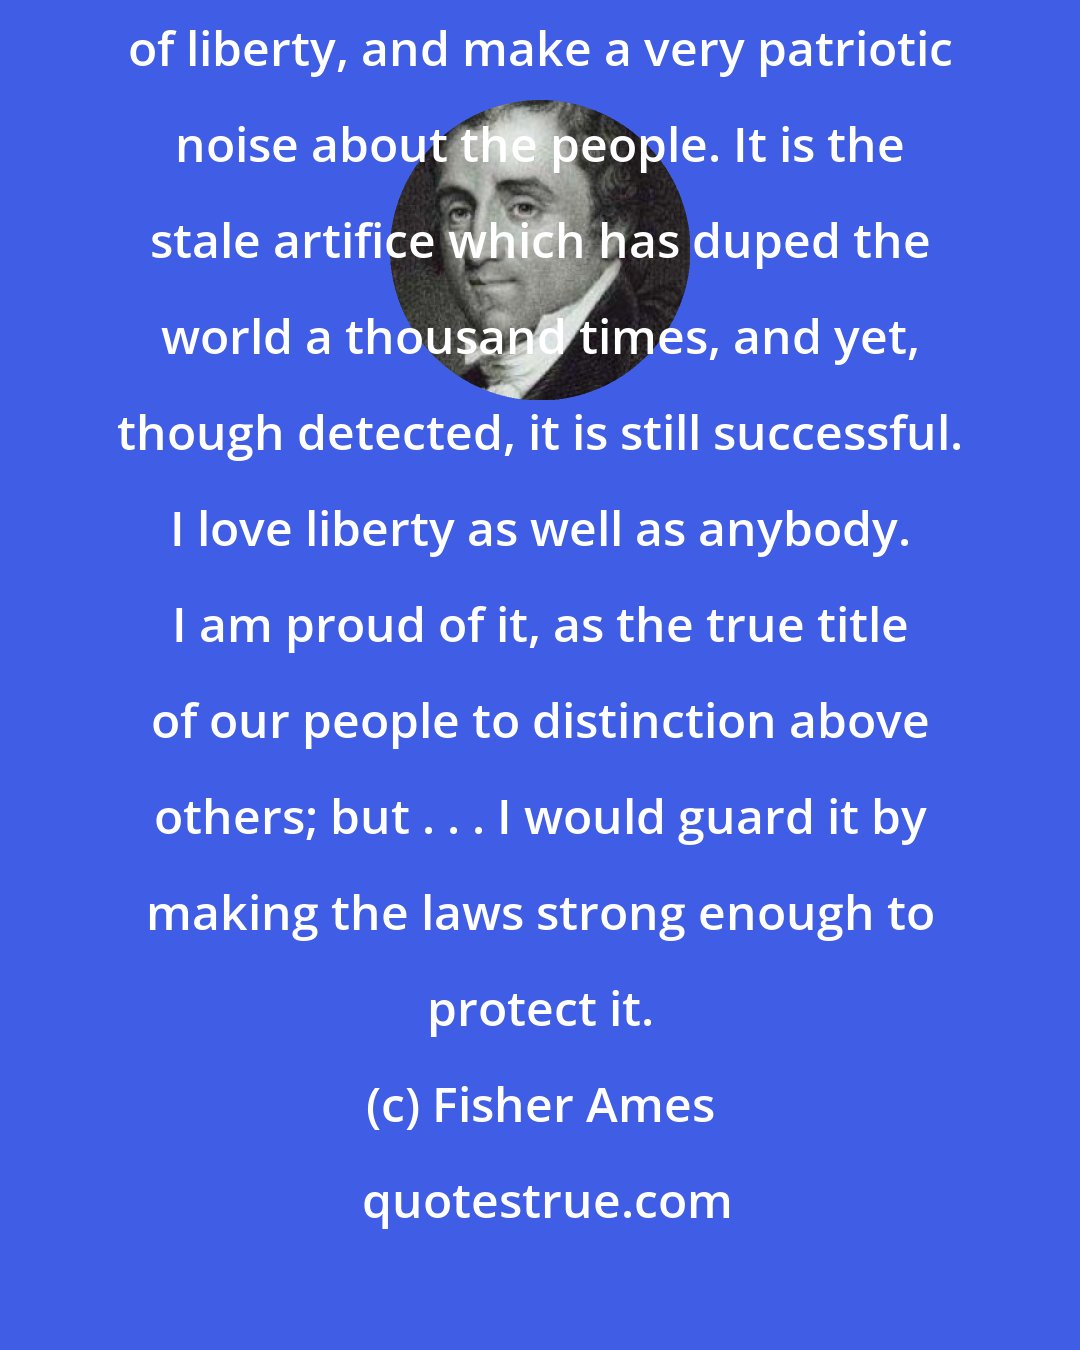 Fisher Ames: I am commonly opposed to those who modestly assume the rank of champions of liberty, and make a very patriotic noise about the people. It is the stale artifice which has duped the world a thousand times, and yet, though detected, it is still successful. I love liberty as well as anybody. I am proud of it, as the true title of our people to distinction above others; but . . . I would guard it by making the laws strong enough to protect it.